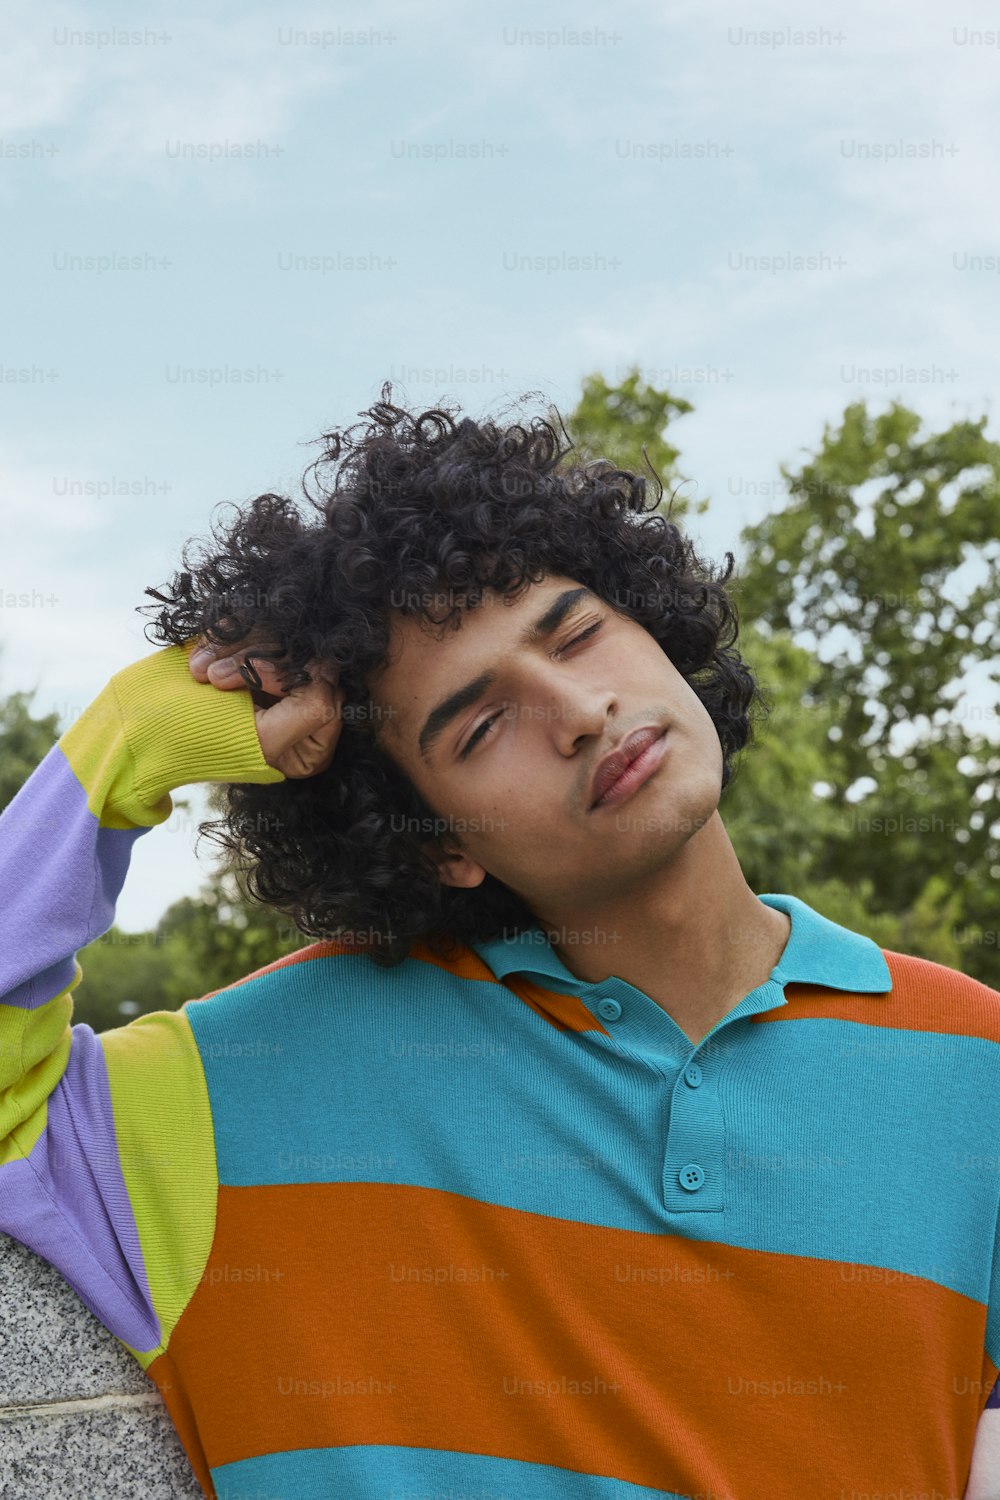 a man with curly hair wearing a colorful shirt